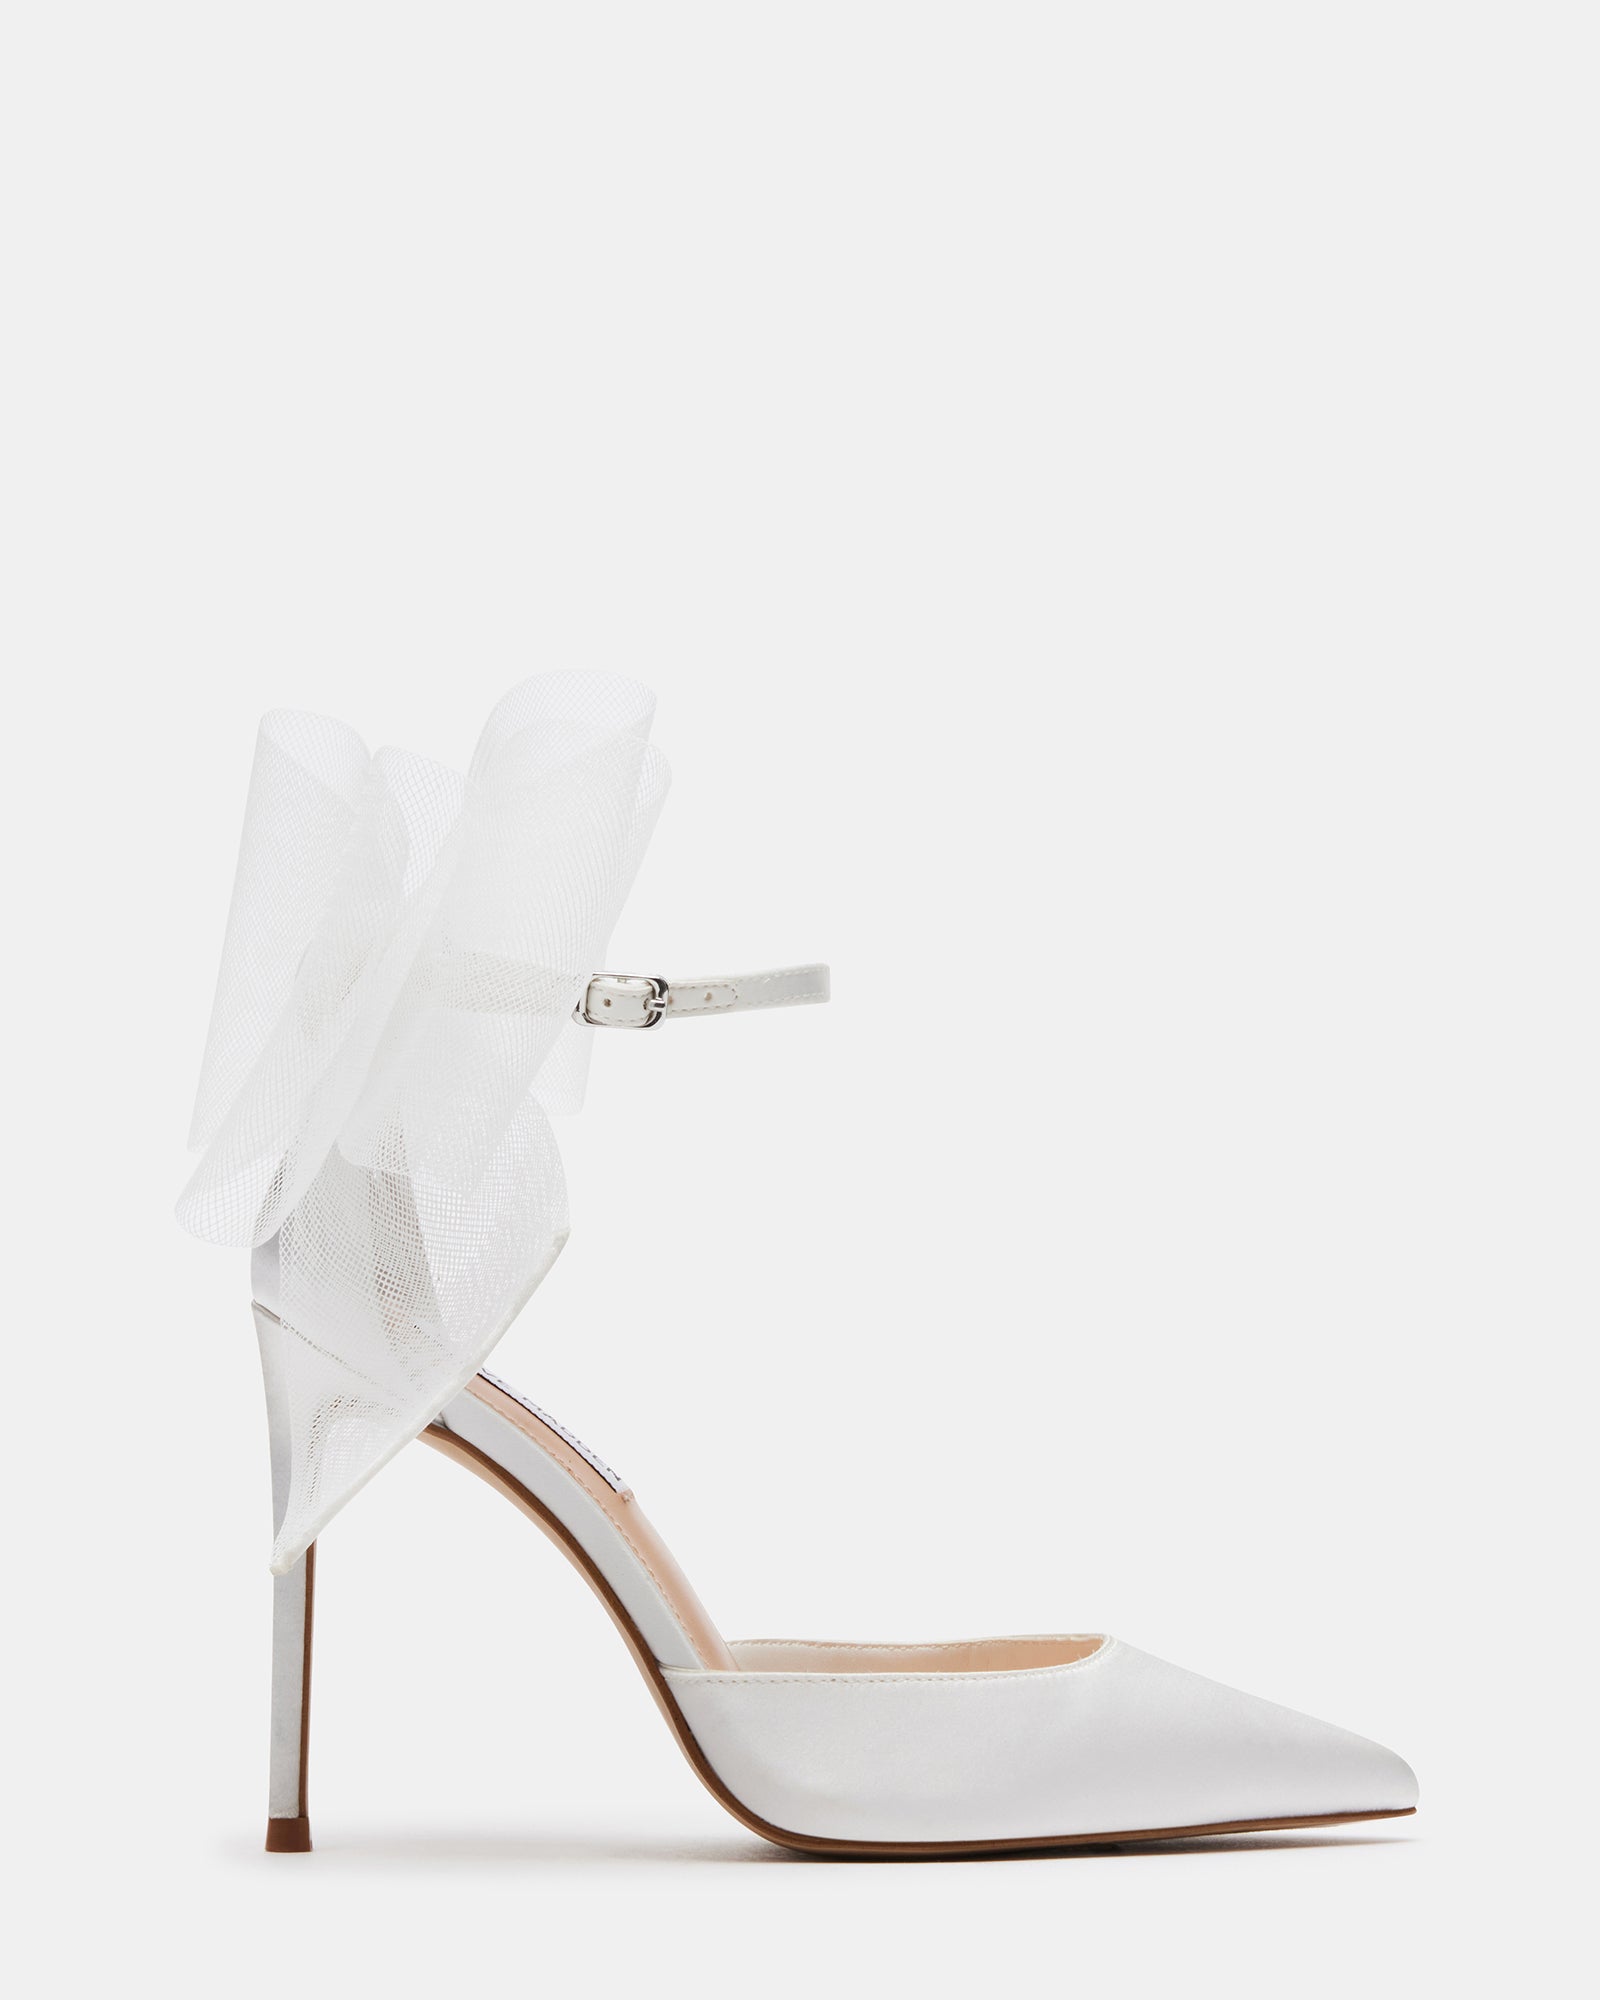 WHITE Satin Pointy Toe Pump Low Heel with SATIN BOW - Wedding Shoes, Bridal  Shoes, Bridesmaids Shoes